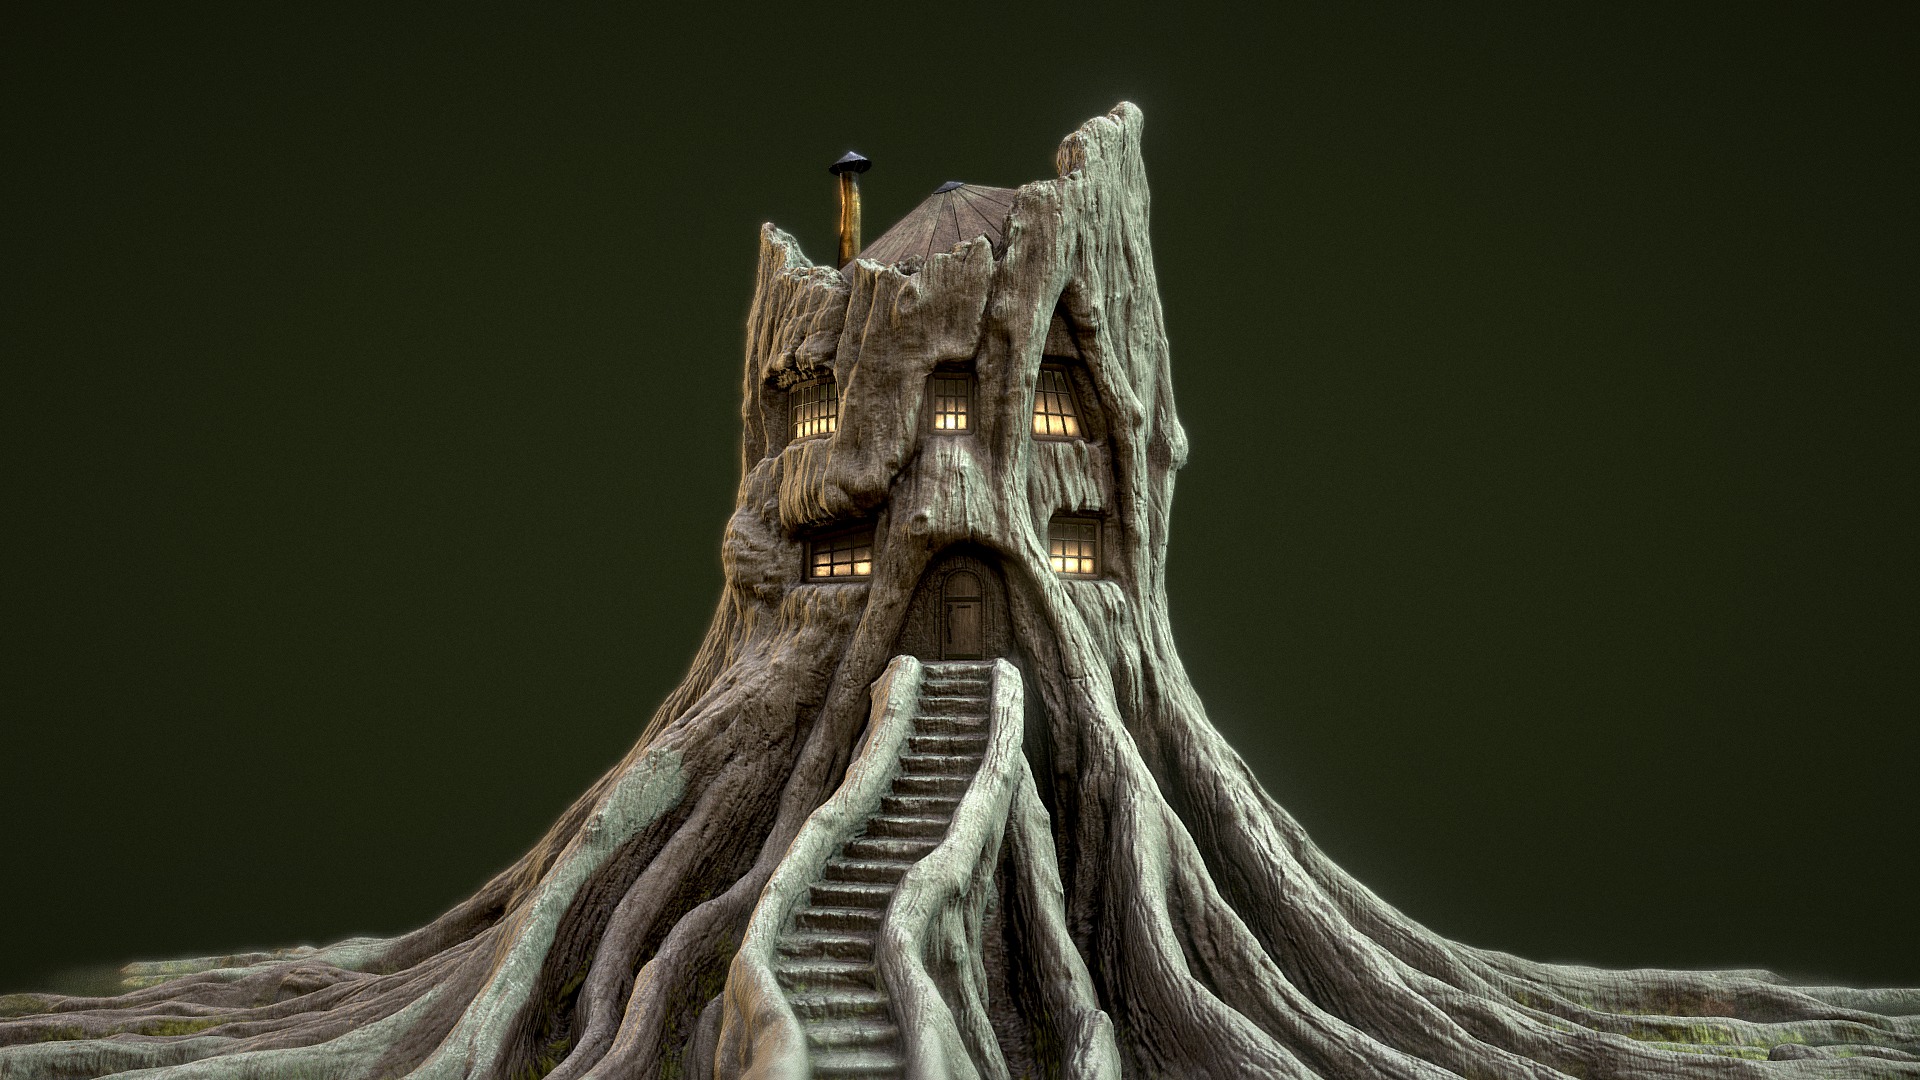 Early version of a commissioned treehouse asset for a music video animation.

The asset was only viewed from front so the backside lacks detail, and the house part was drastically changed in the later versions. Probably won't upload the final version due to personal preference. 

Textures were converted from specular-gloss to metalness-gloss and downsized for sketchfab upload.


Tree sculpted in ZBrush, retopo with ZBrush zremesher, additional details modeled in 3ds Max, uv unwrapped in ZBrush and packed in UVLayout, textured in Substance Painter - Treehouse - 3D model by patrix 3d model